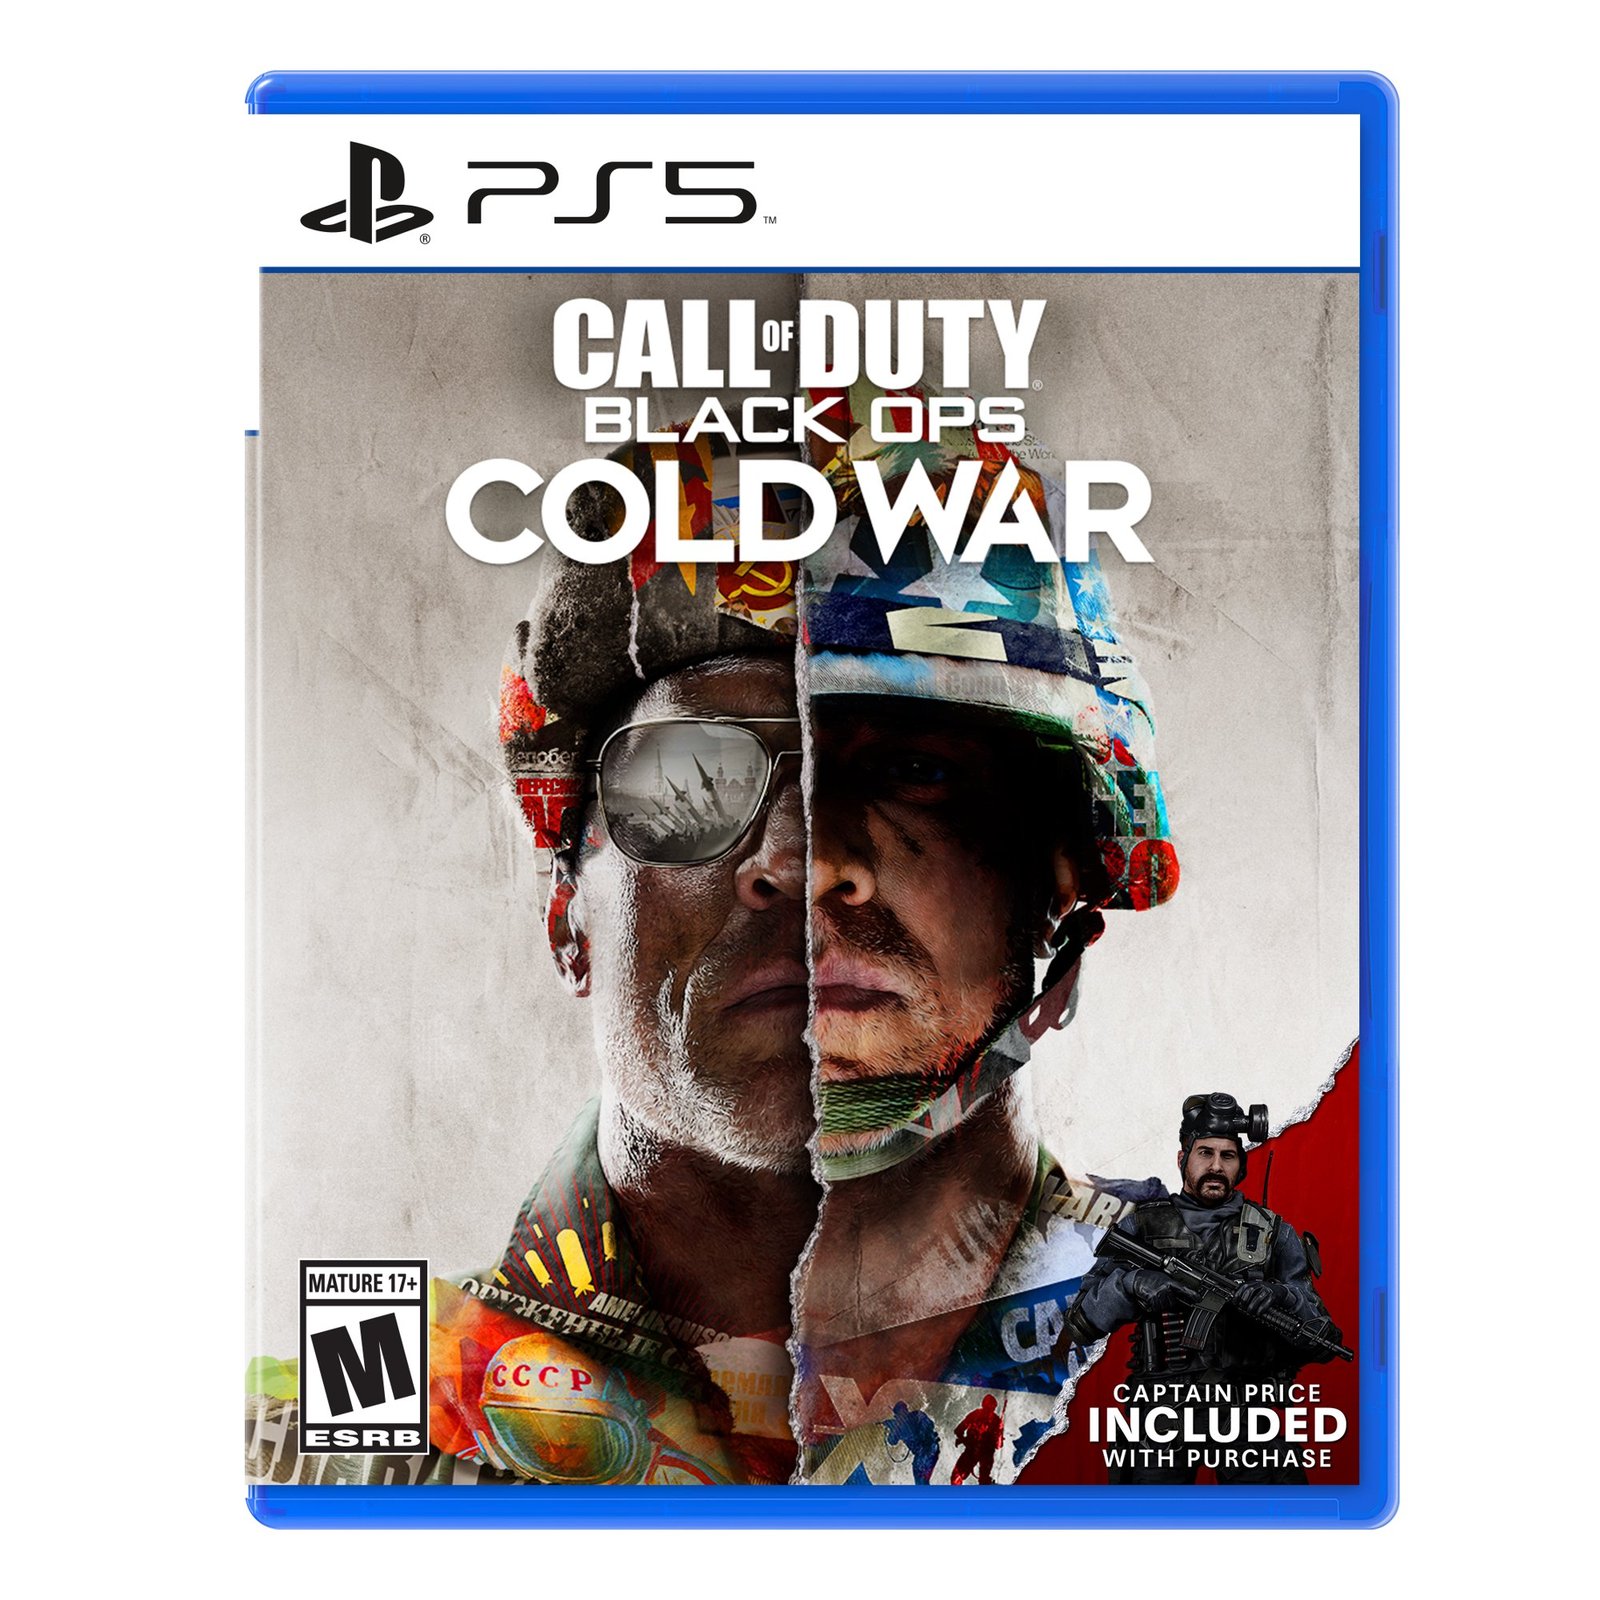 Call of Duty Black Ops Cold War PlayStation 5 Activision Video Games (Brand New)